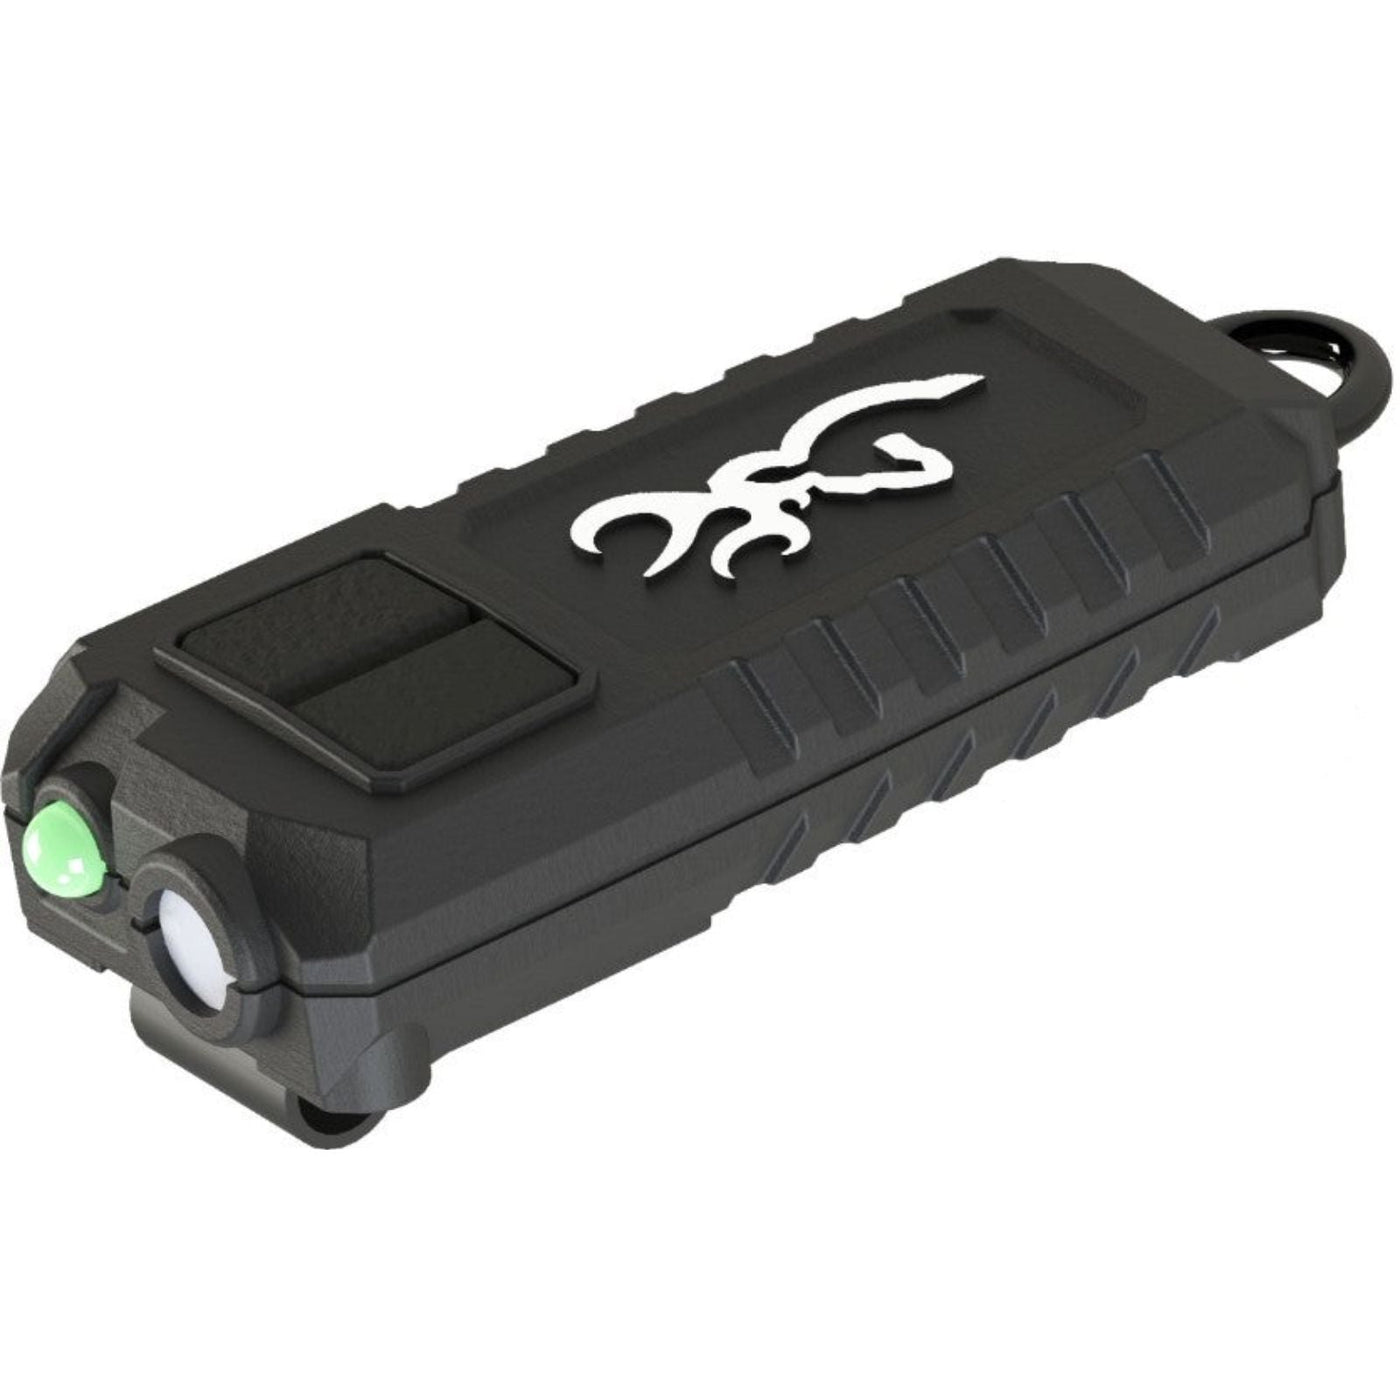 Browning Browning Trailmate USB Rechargeable Keychain Cap Light Lights